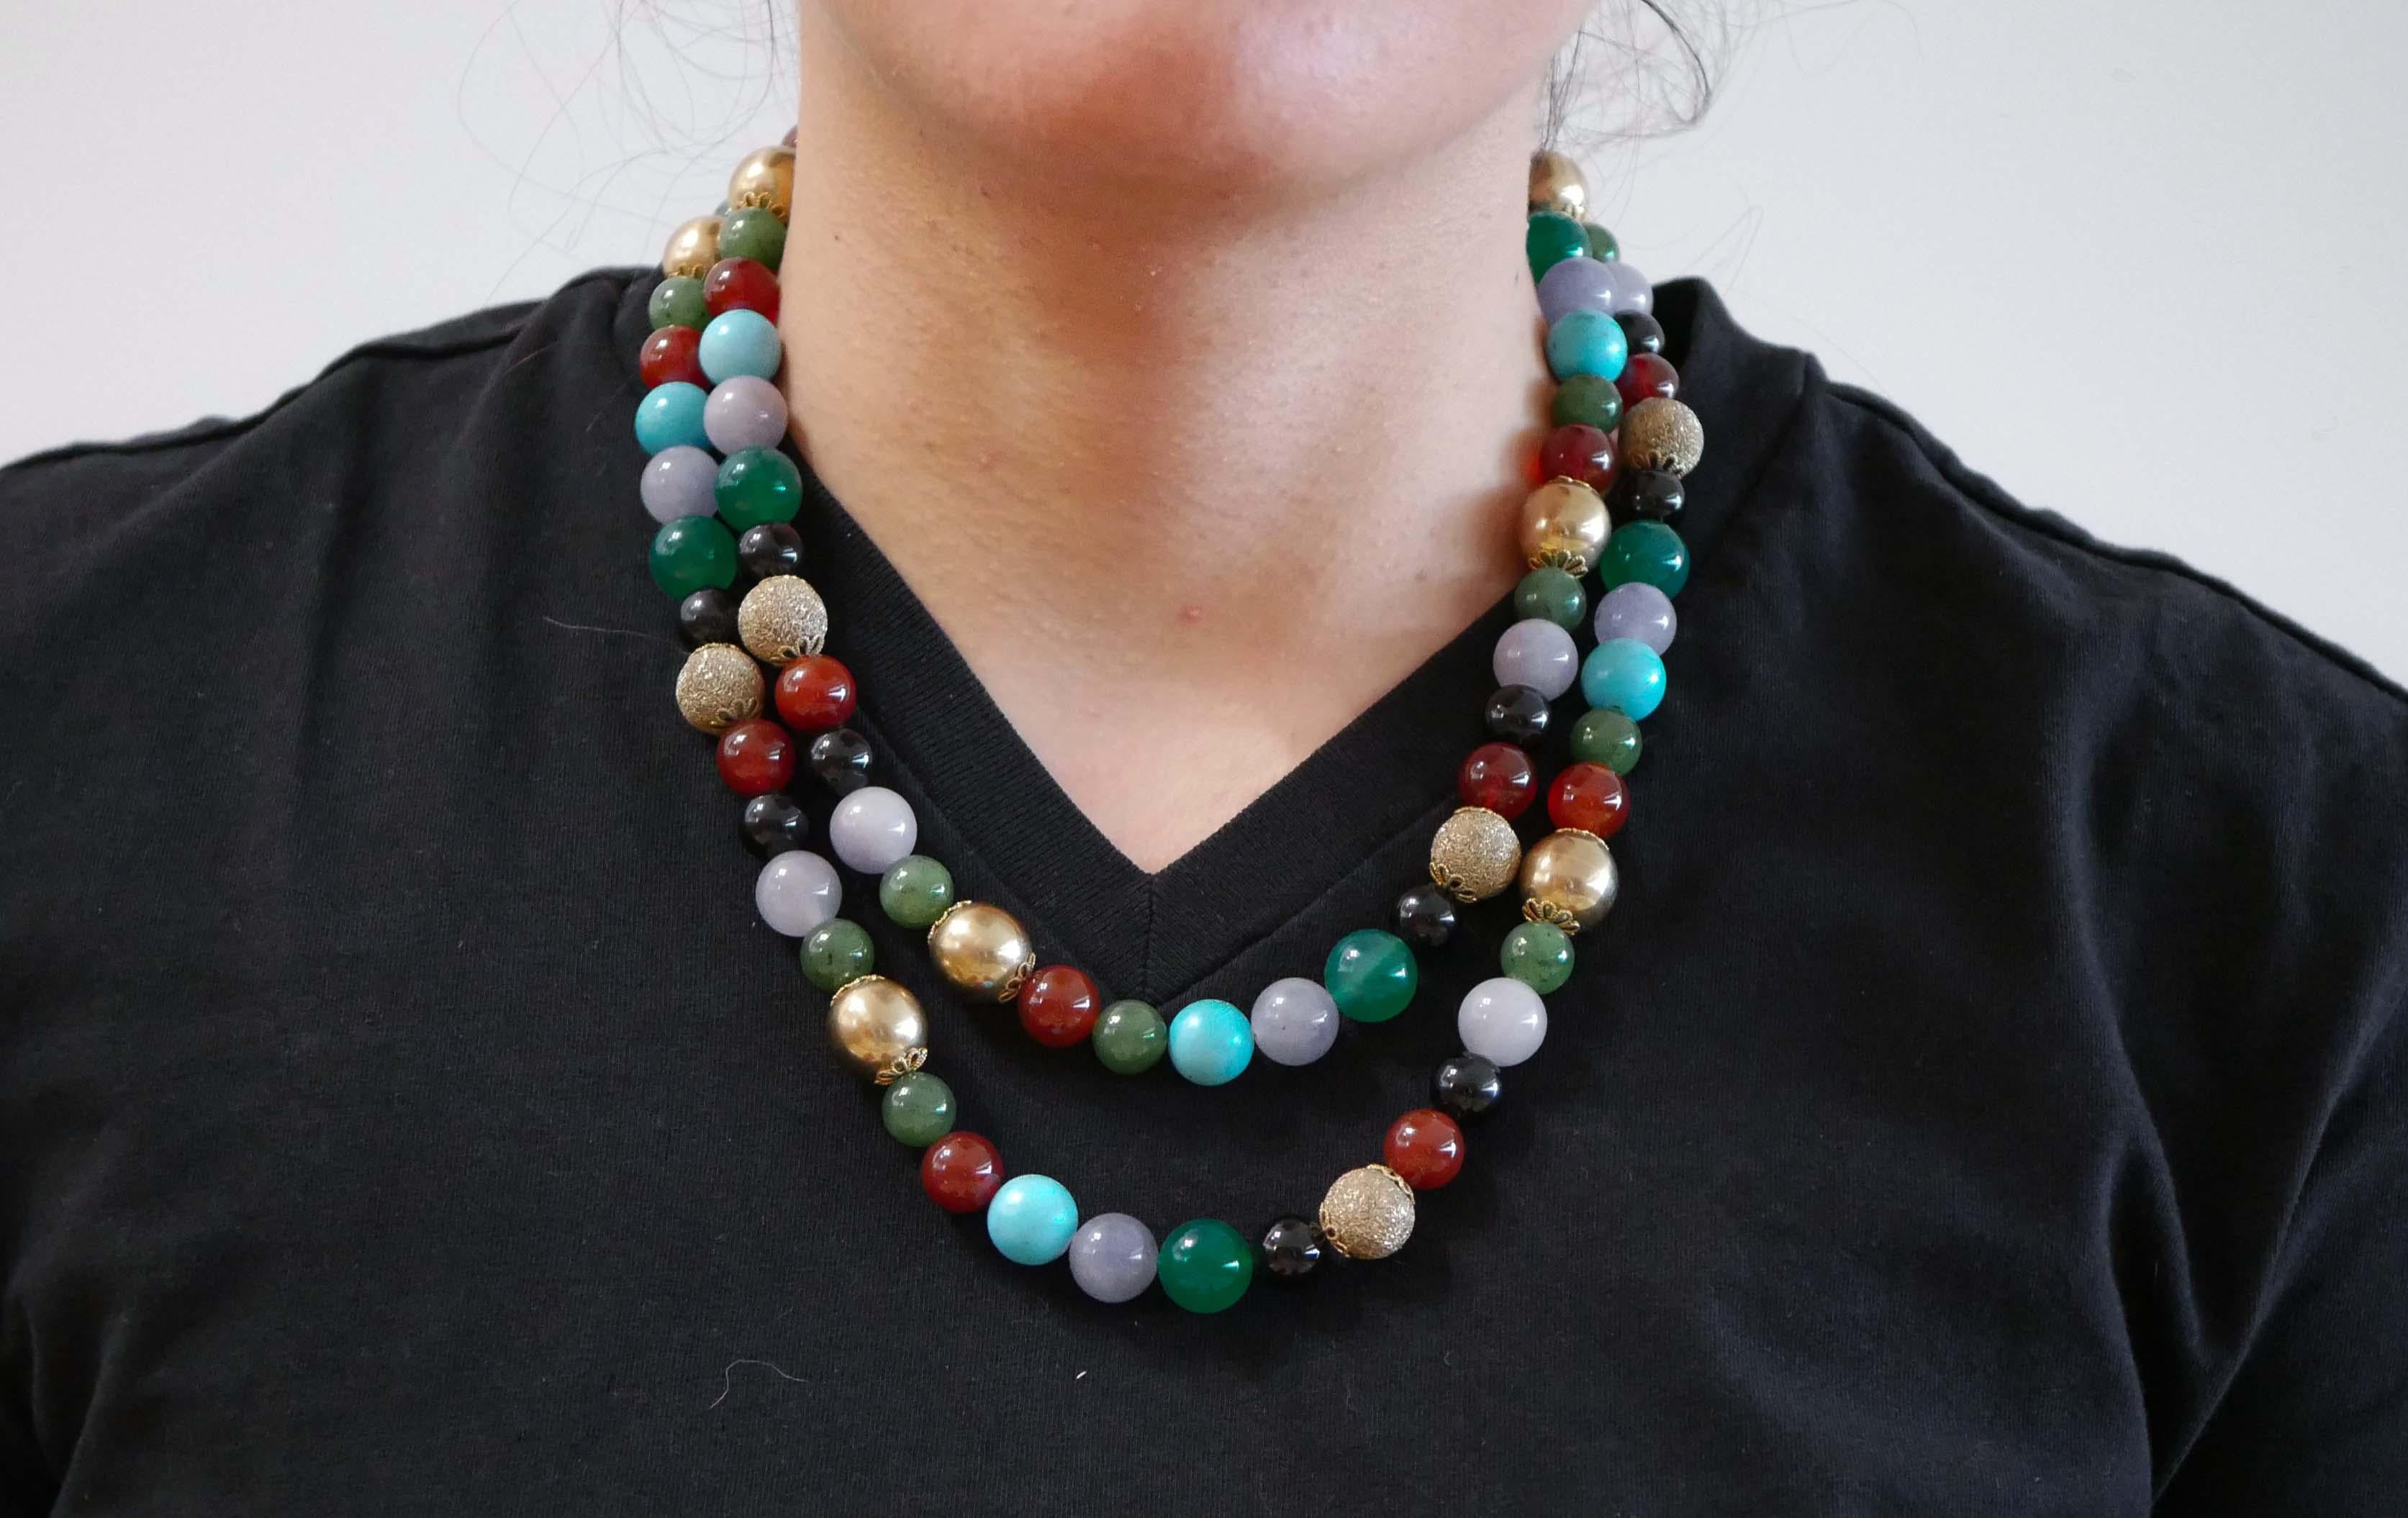 Women's Carnelian, Turquoise, Onyx, Agate, Tourmaline, Rose Gold and Silver Necklace. For Sale